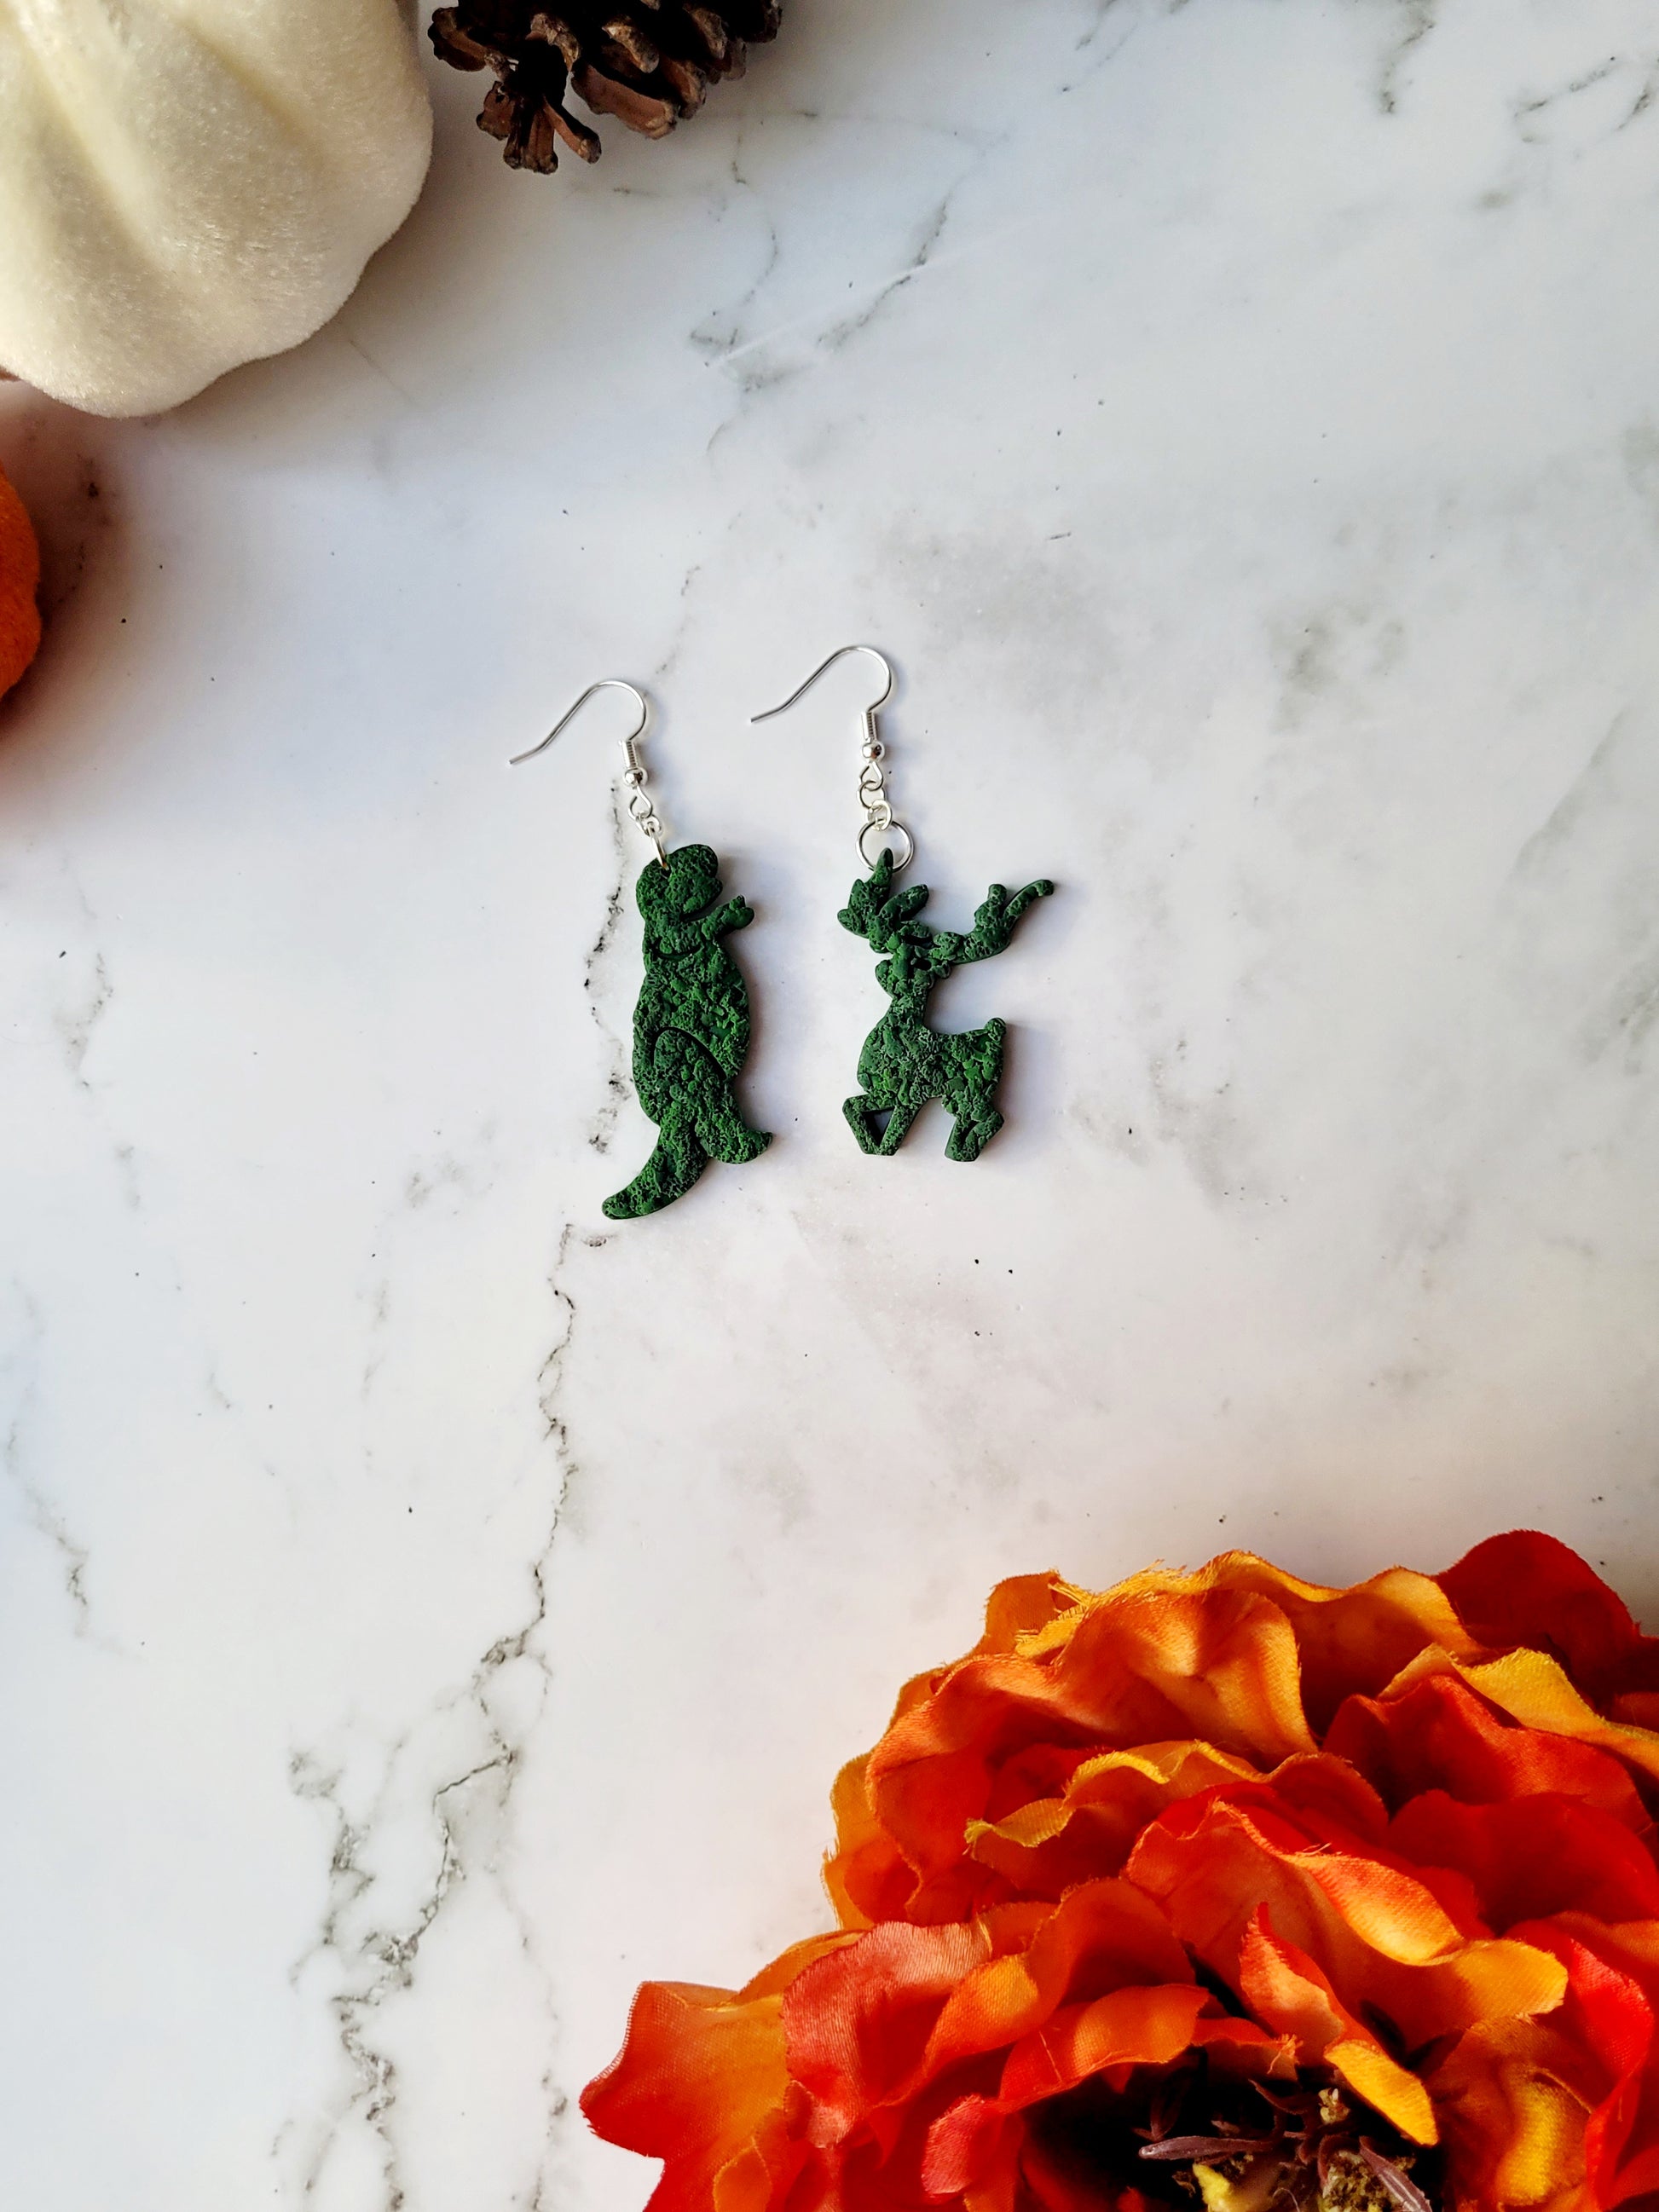 Edward Scissorhands themed topiary earrings on a marble background.